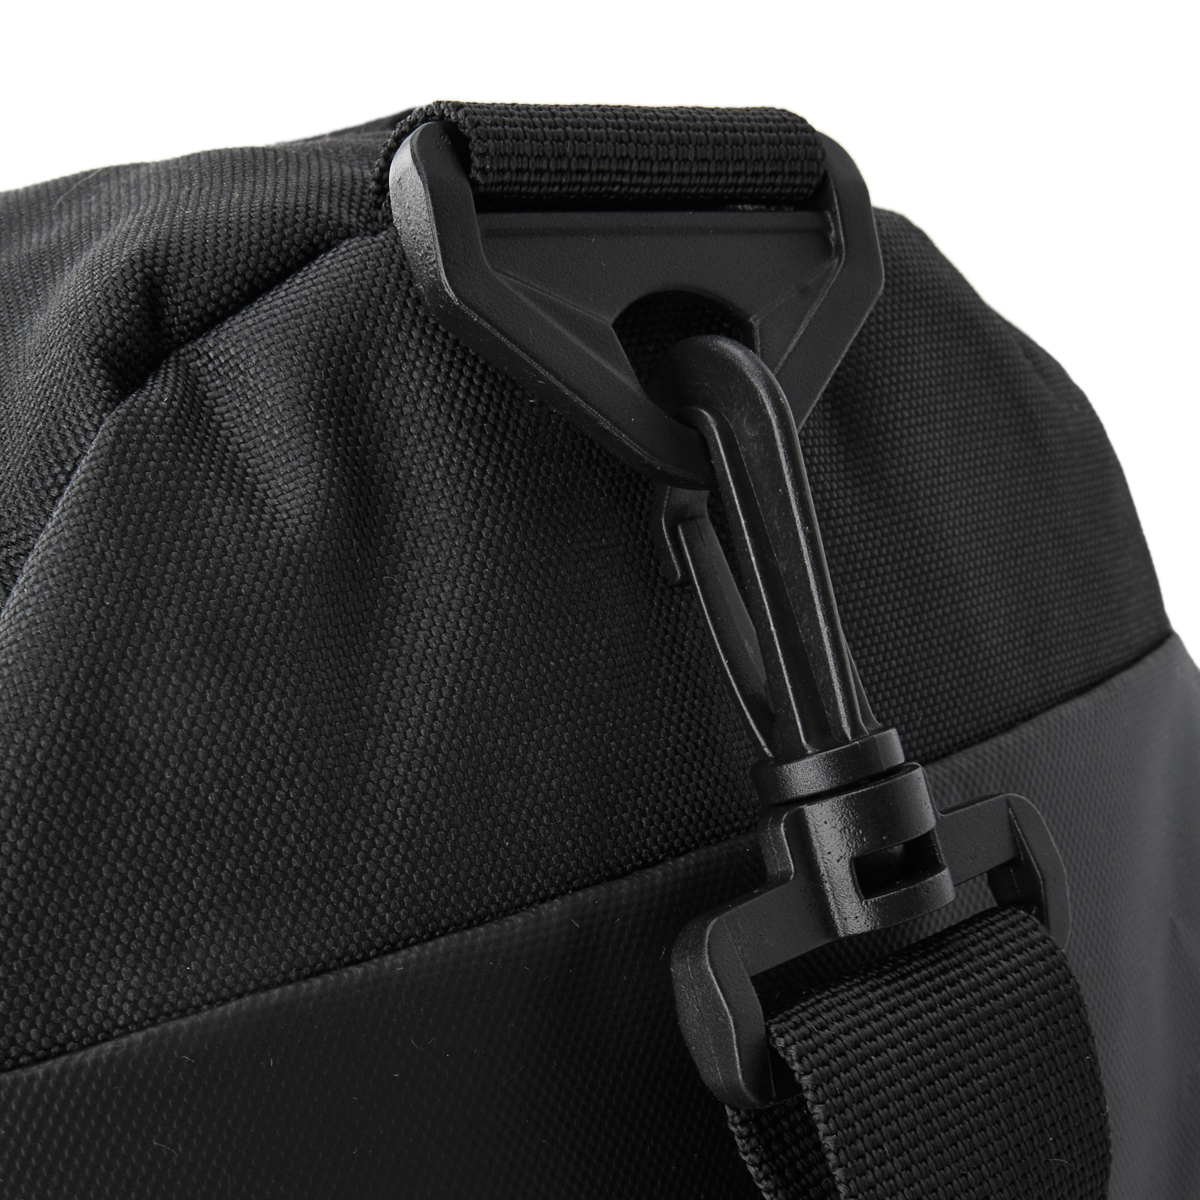 Bolso Topper Performance II,  image number null